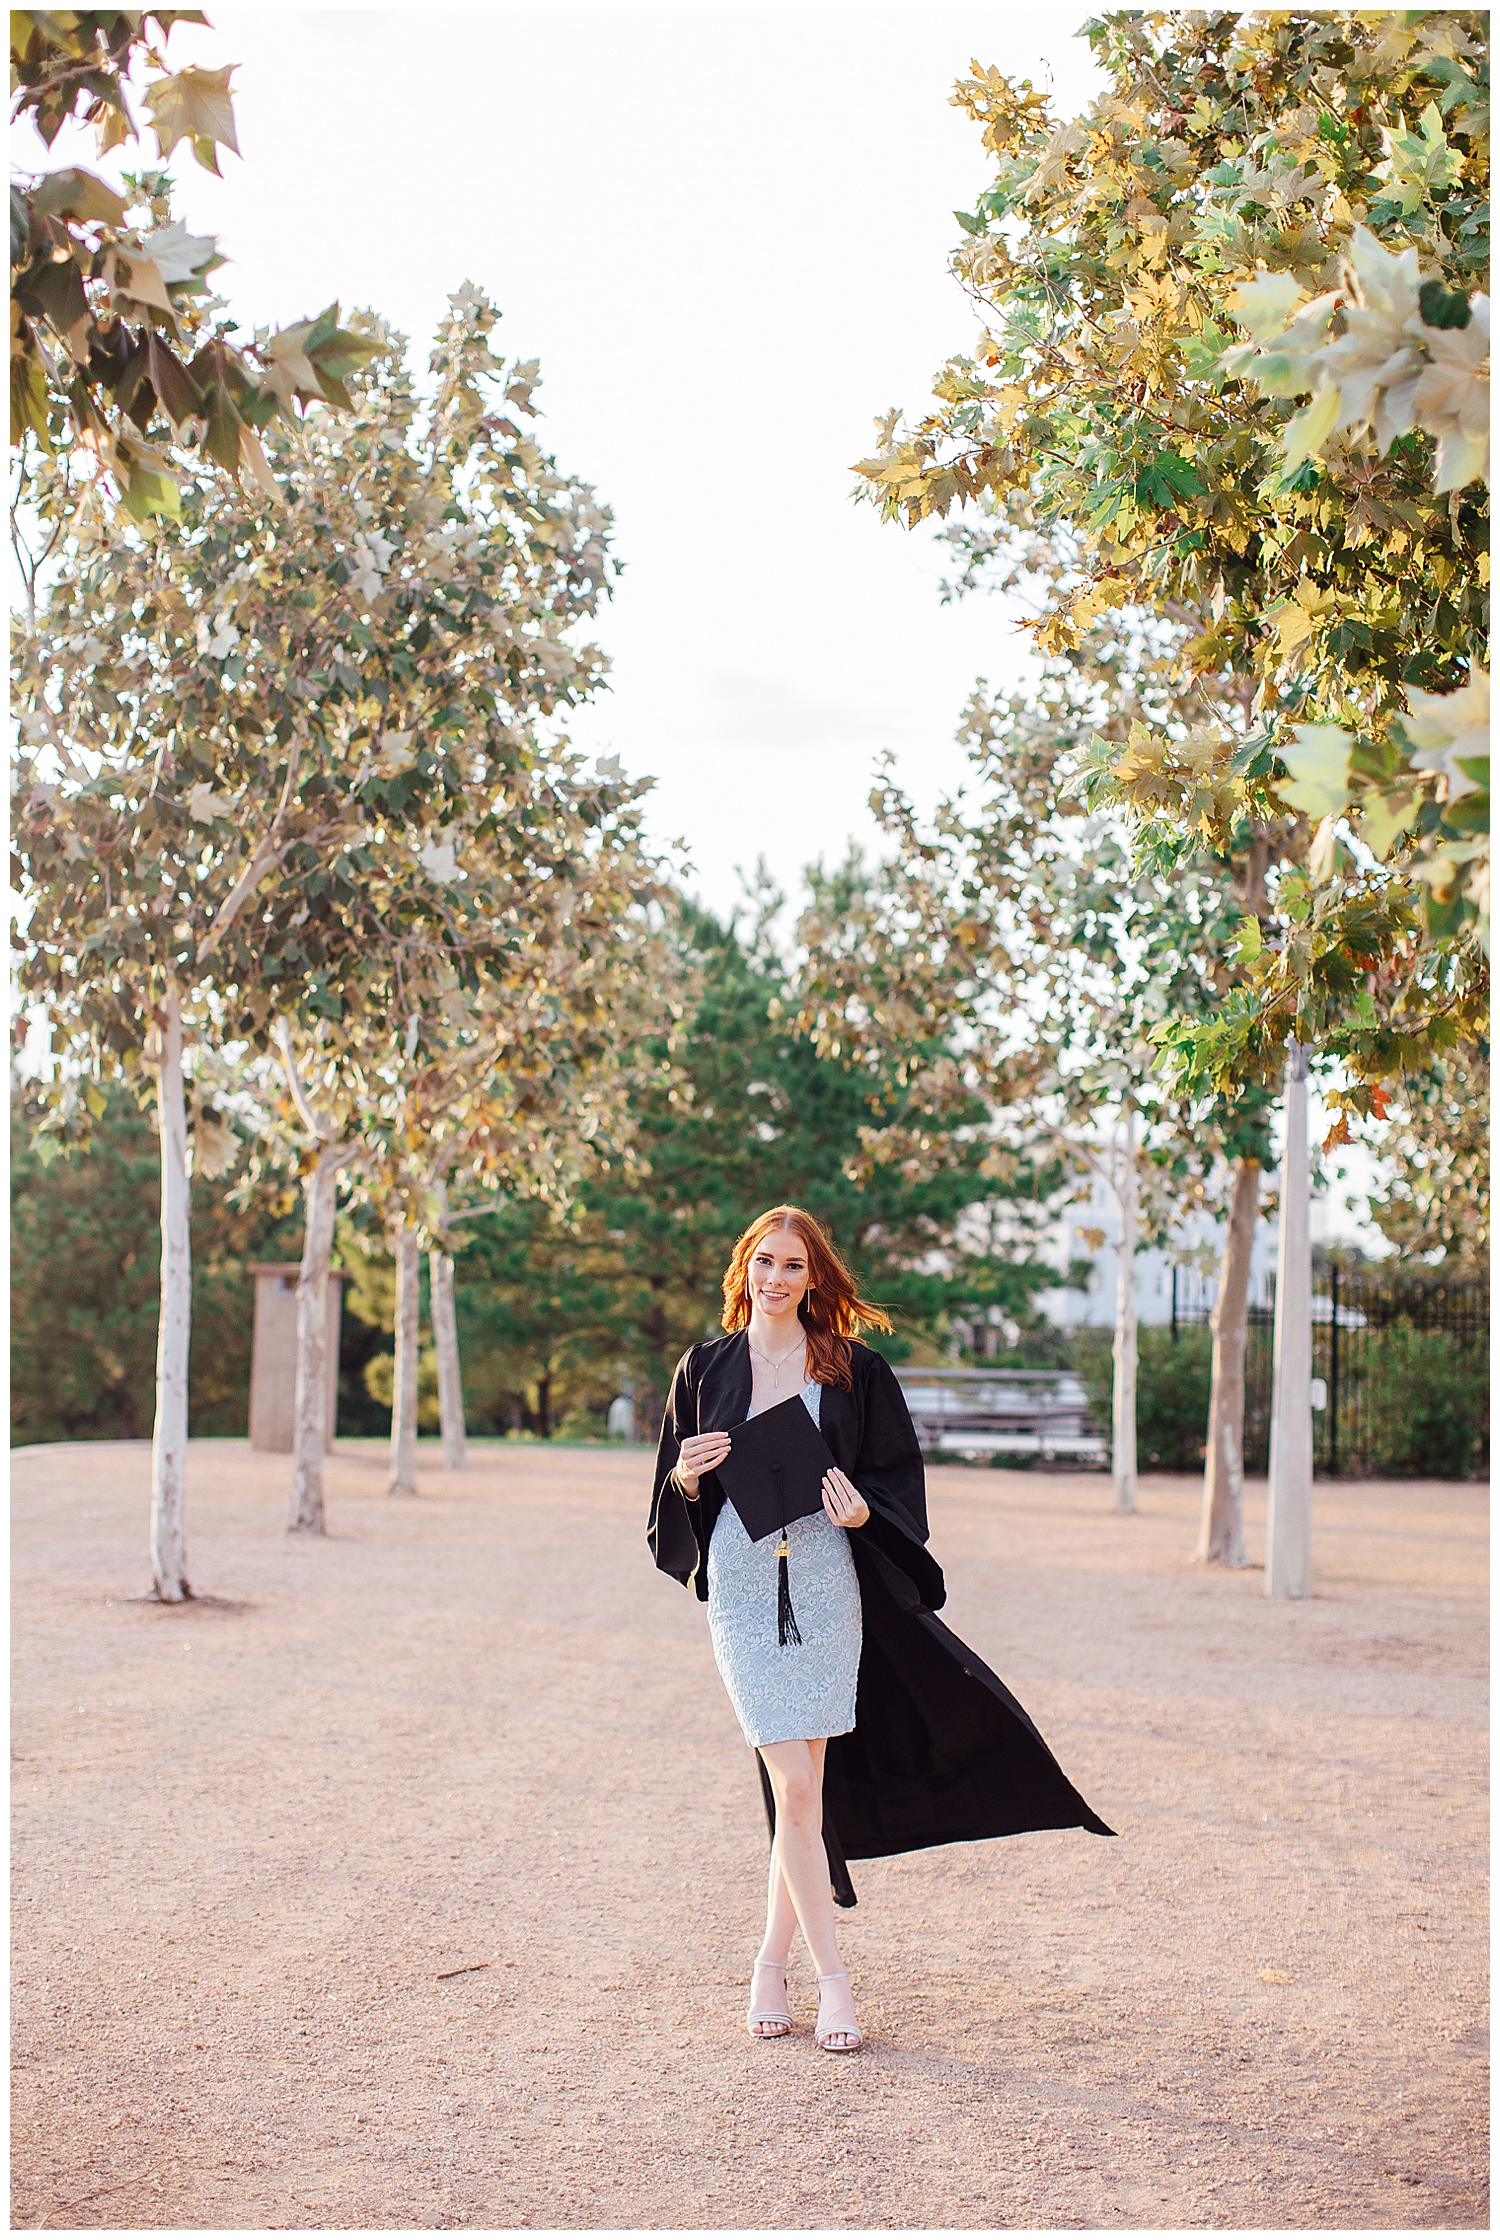 red hair girl in baby blue dress wearing black graduation gown holding cap outdoors houston downtown